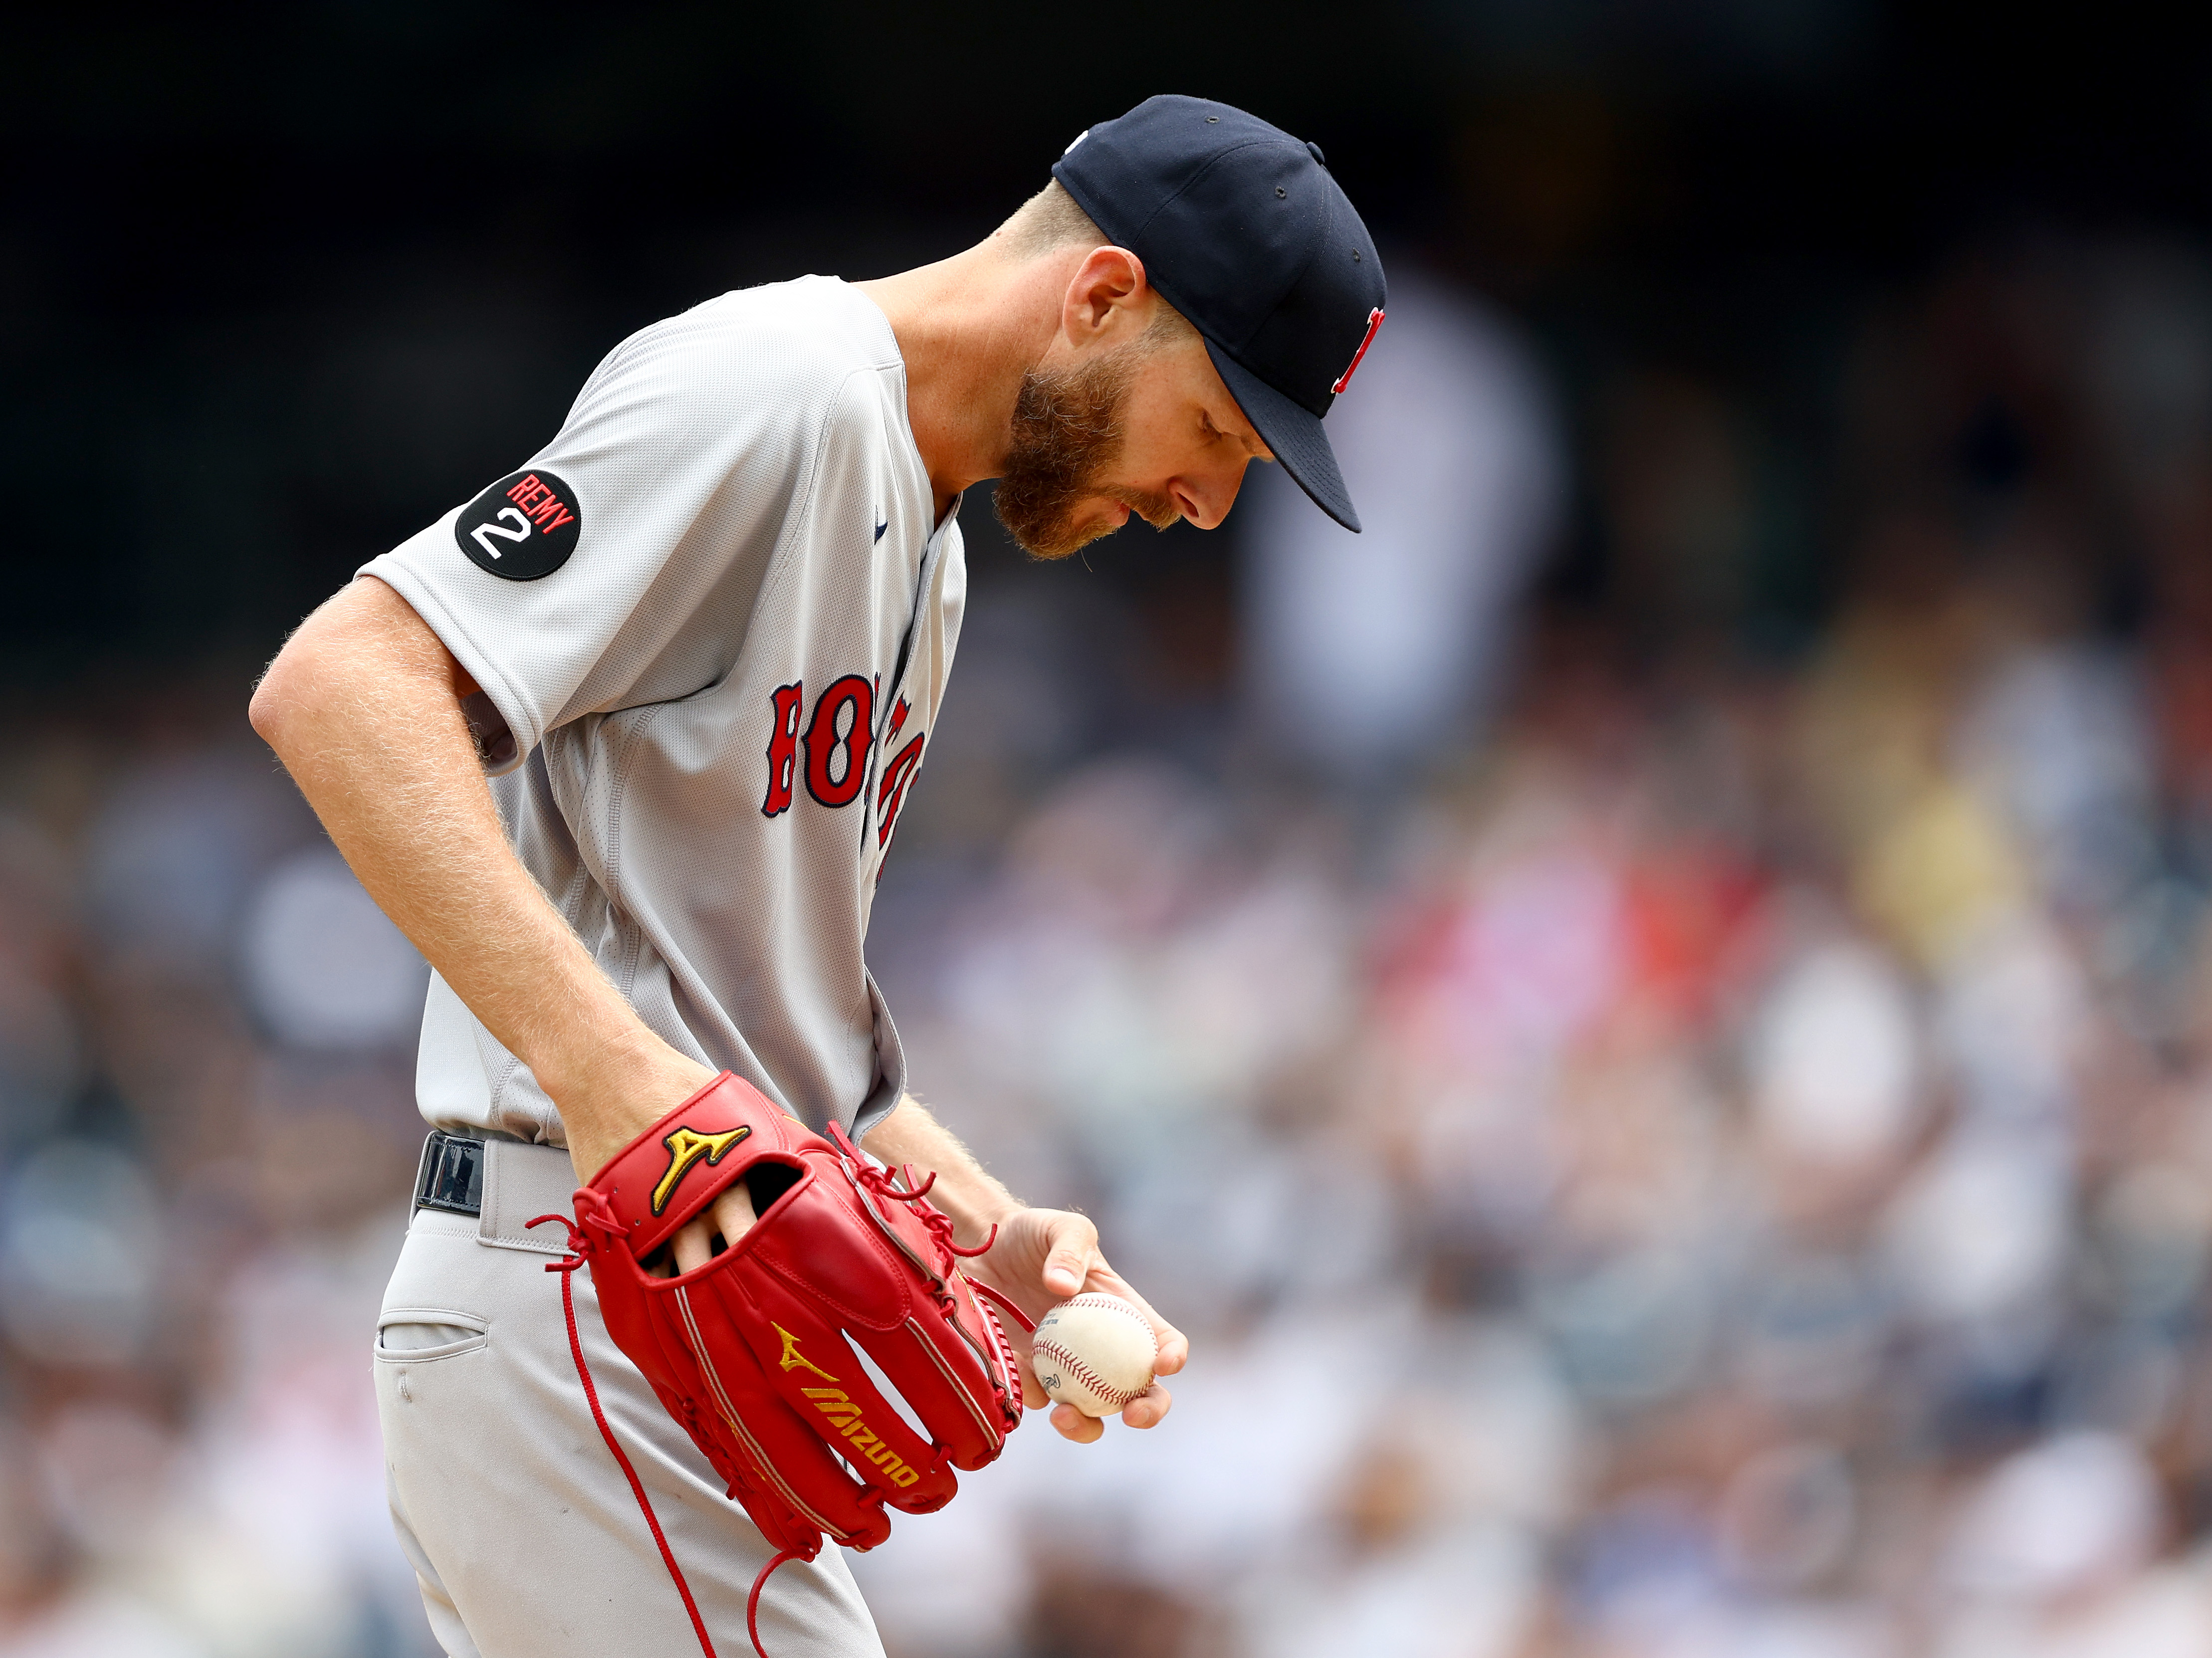 Chris Sale scratched from game after allegedly cutting up team's throwback  uniforms during dispute – New York Daily News